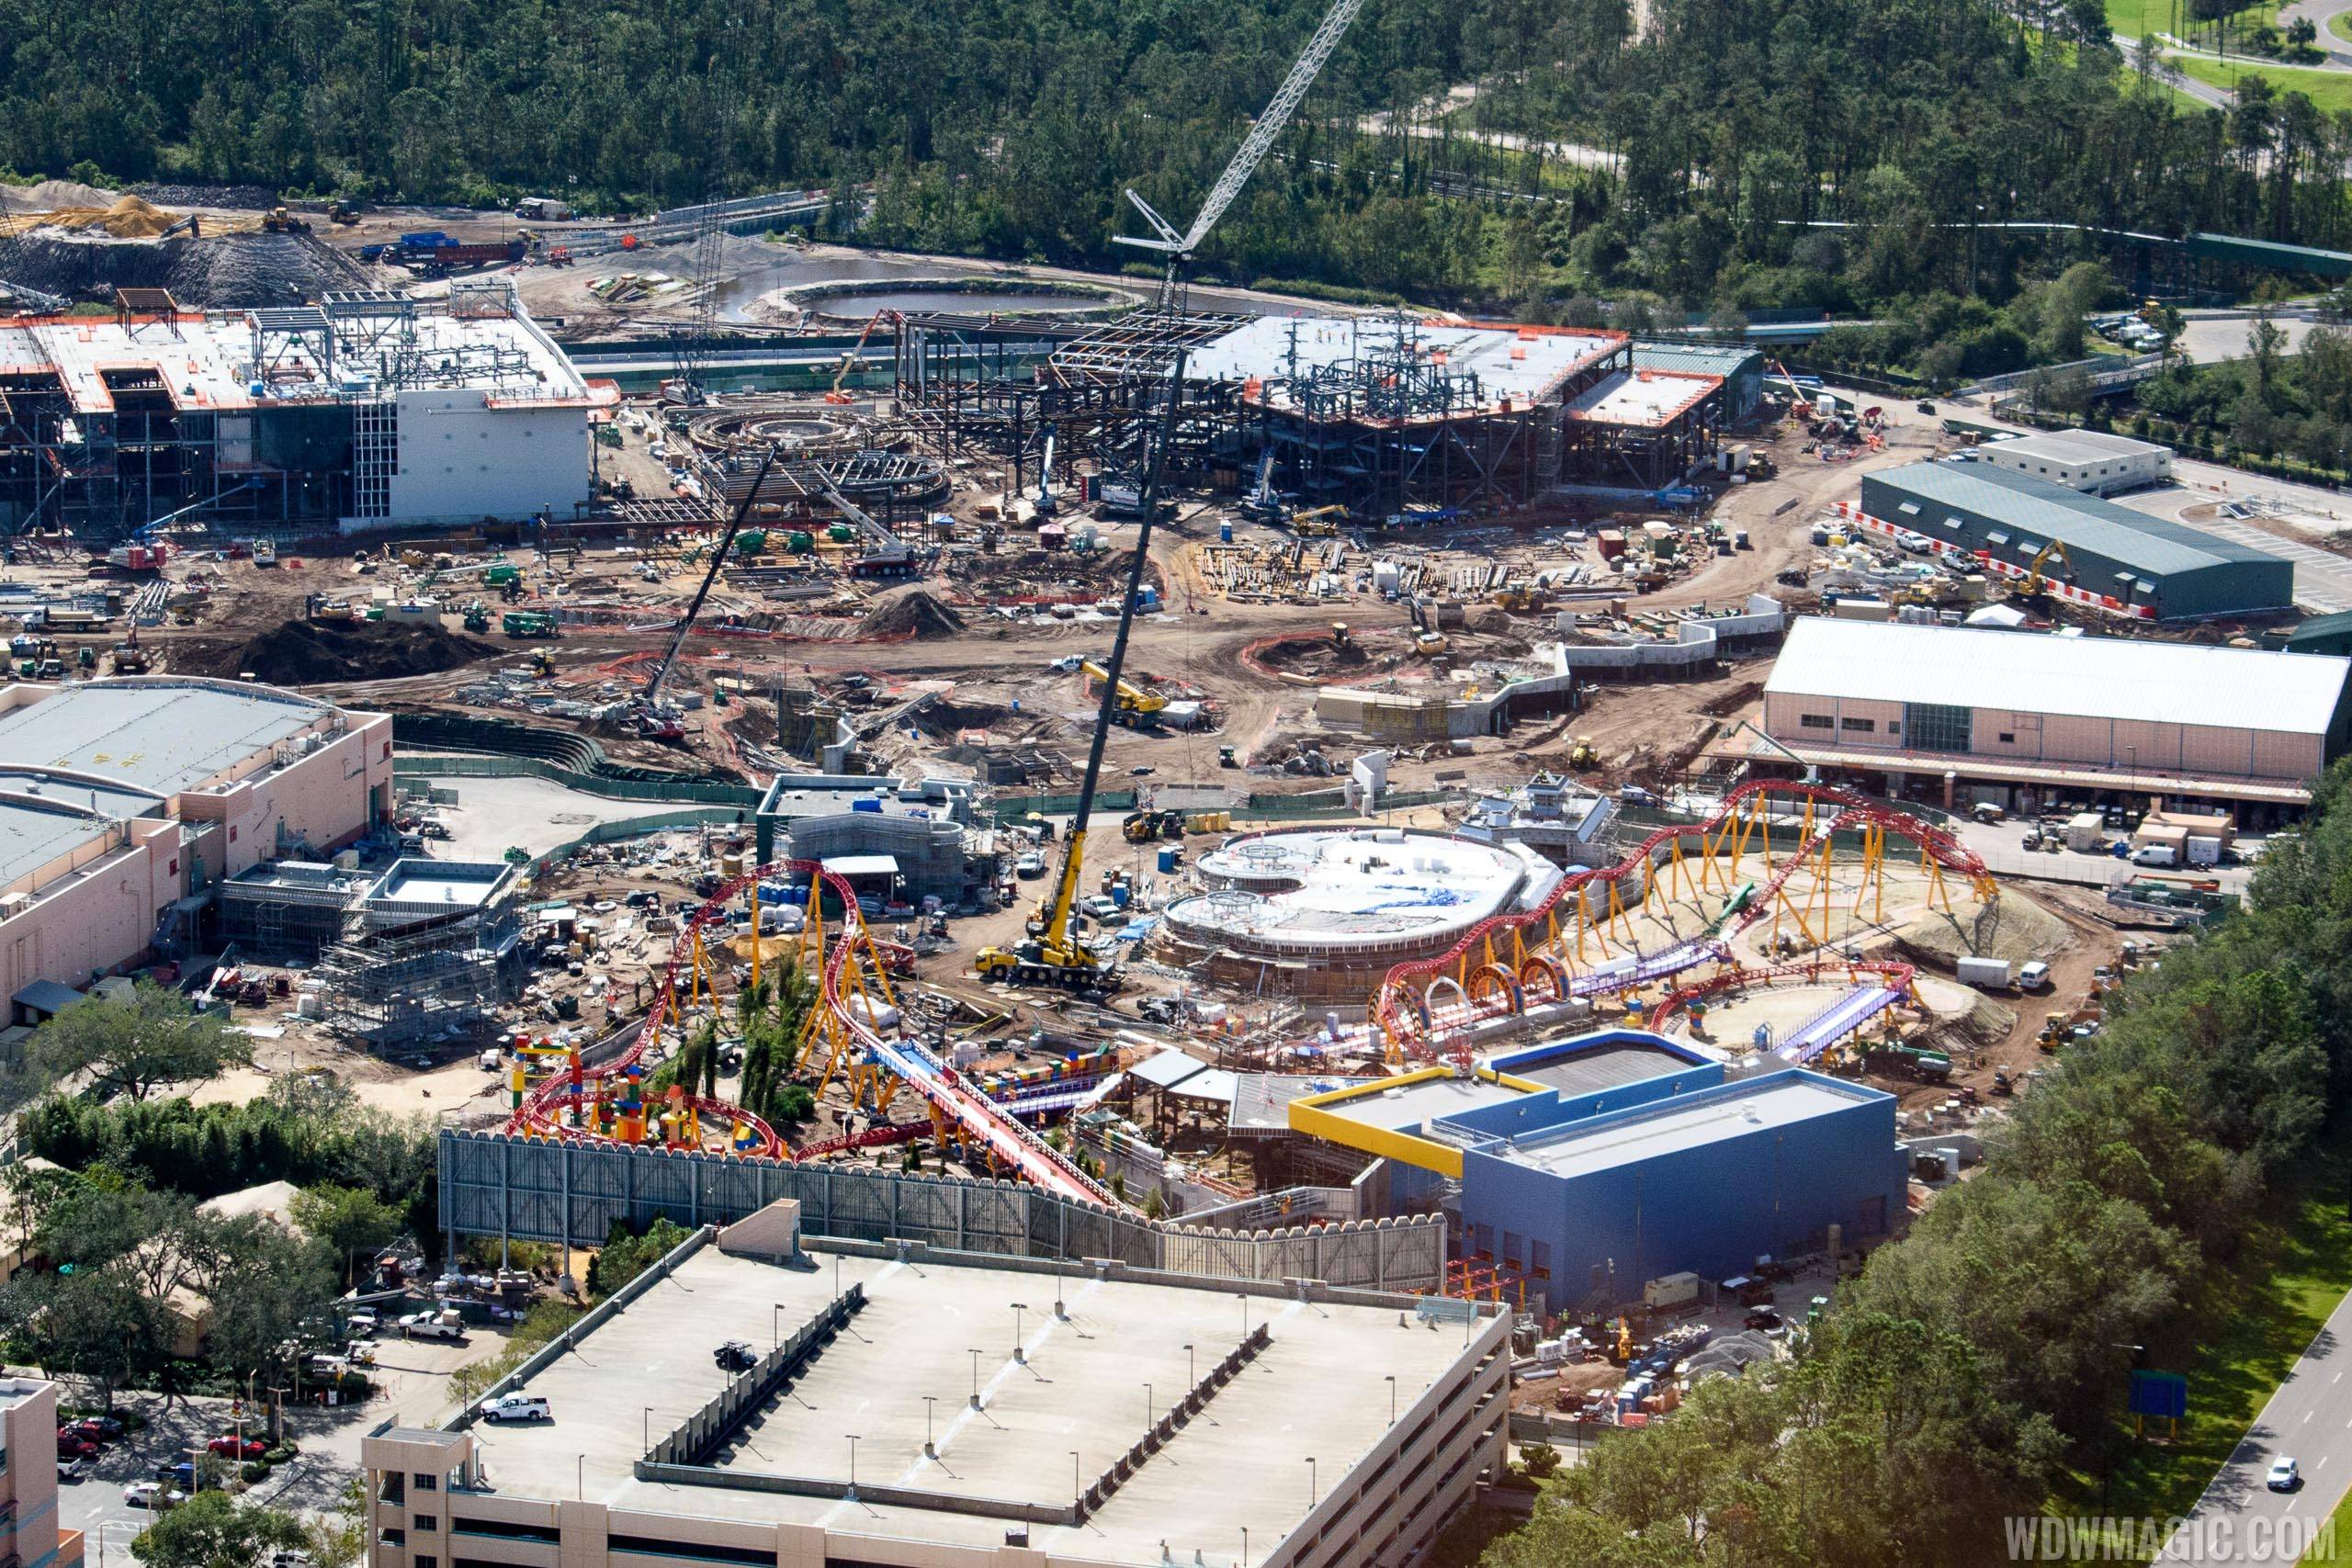 PHOTOS - Views of Toy Story Land from the air